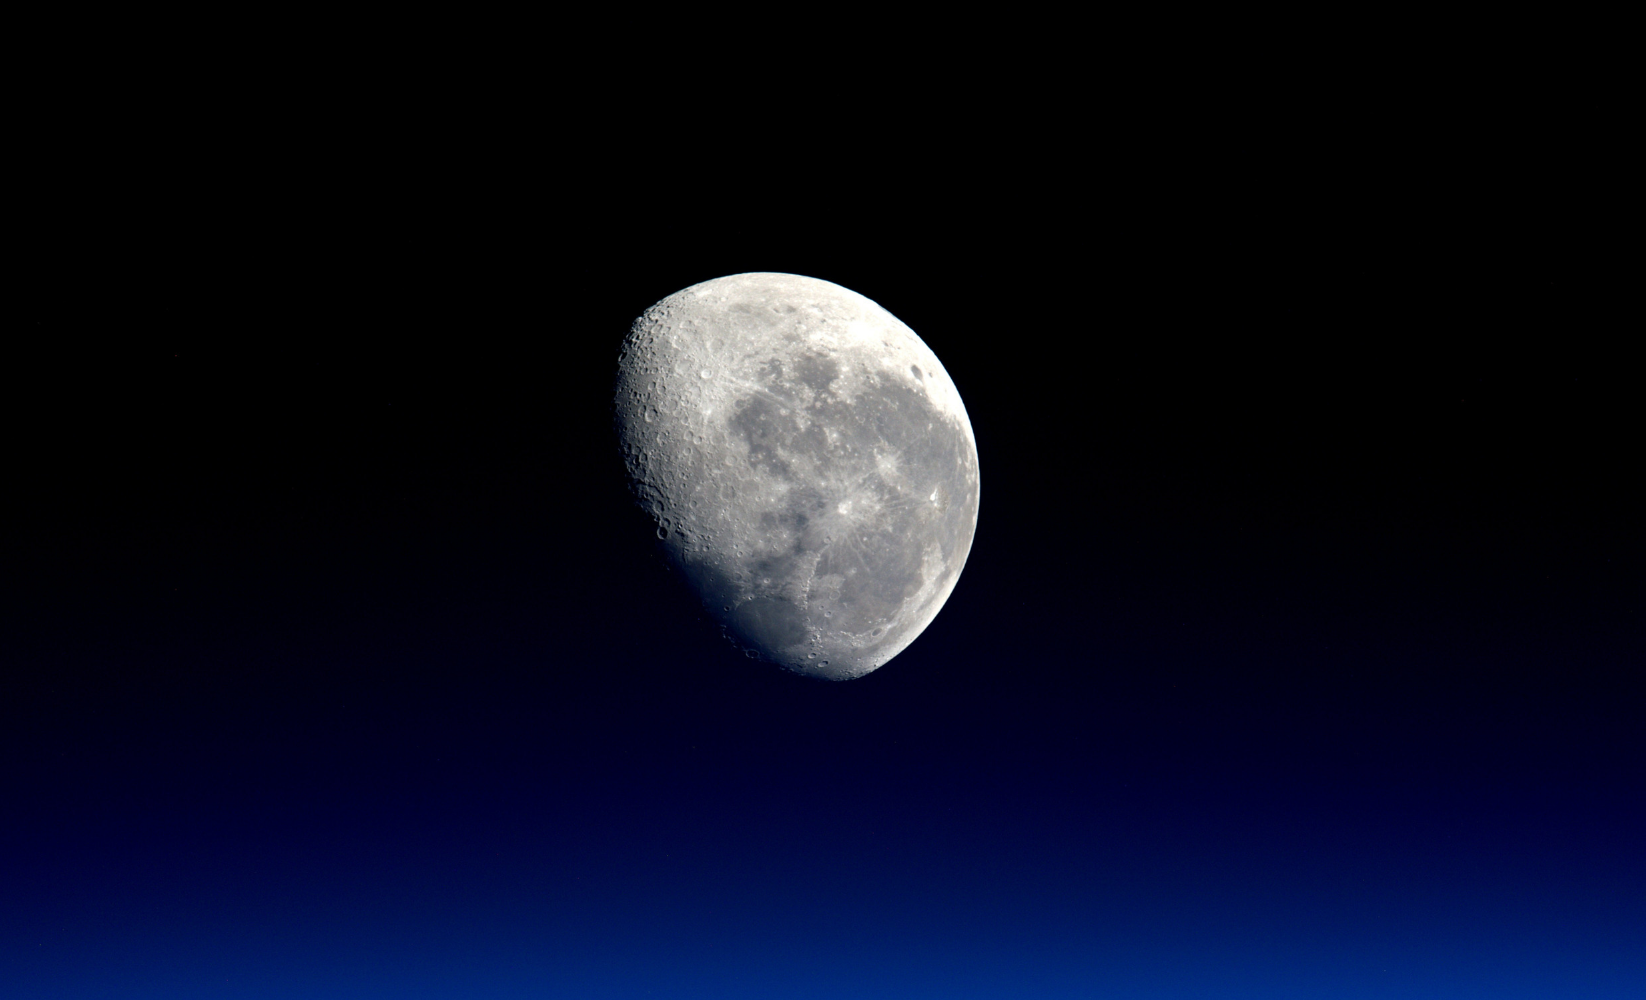 Learn about photographing the moon